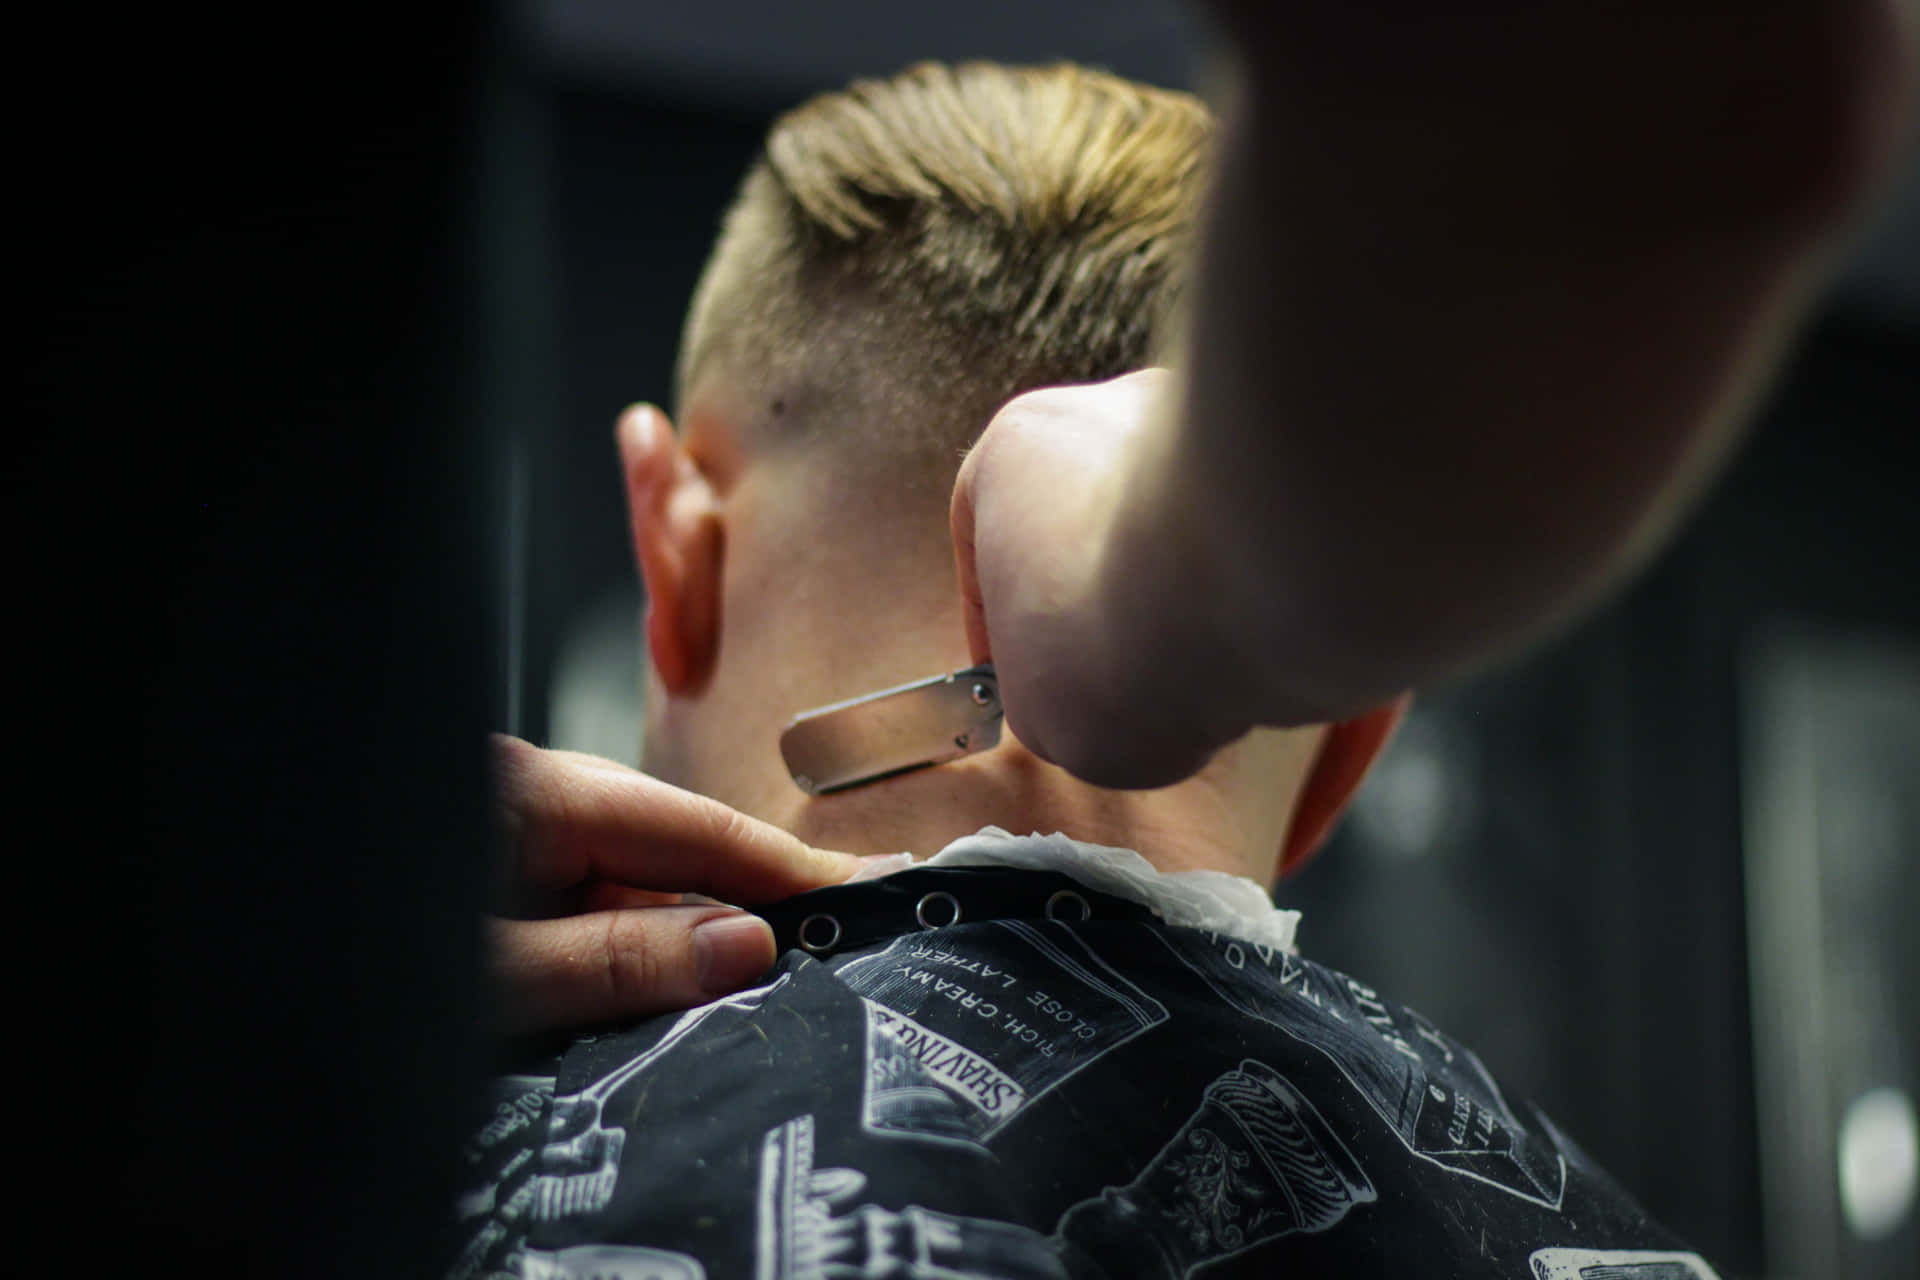 Get the haircut of your dreams at a professional barber shop